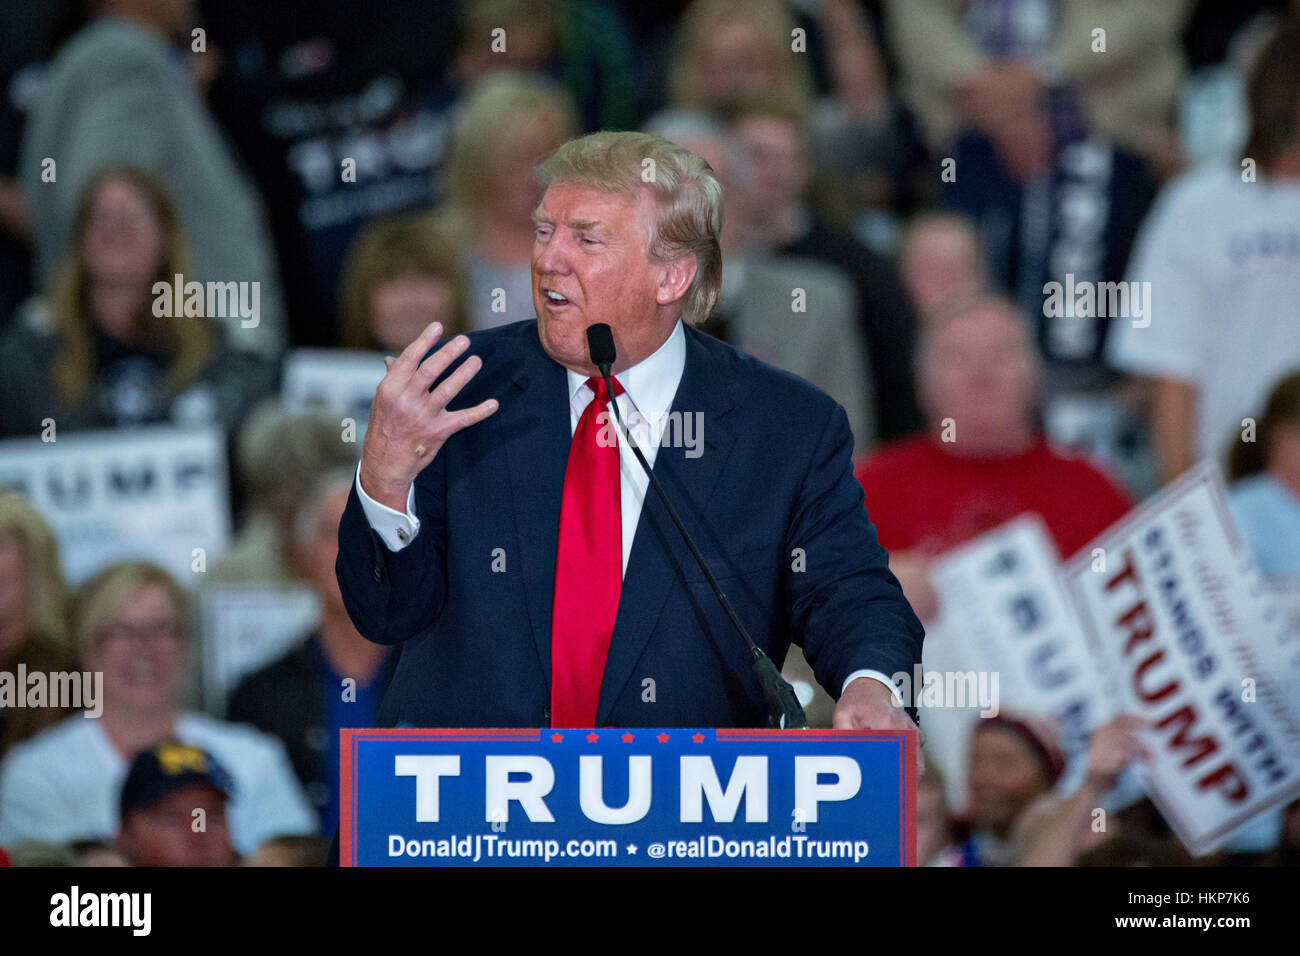 Republican presidential candidate billionaire Donald Trump mocks disabled New York Times reporter Serge Kovaleski during a campaign rally at the Myrtle Beach Convention Center November 24, 2015 in Myrtle Beach, South Carolina. Stock Photo